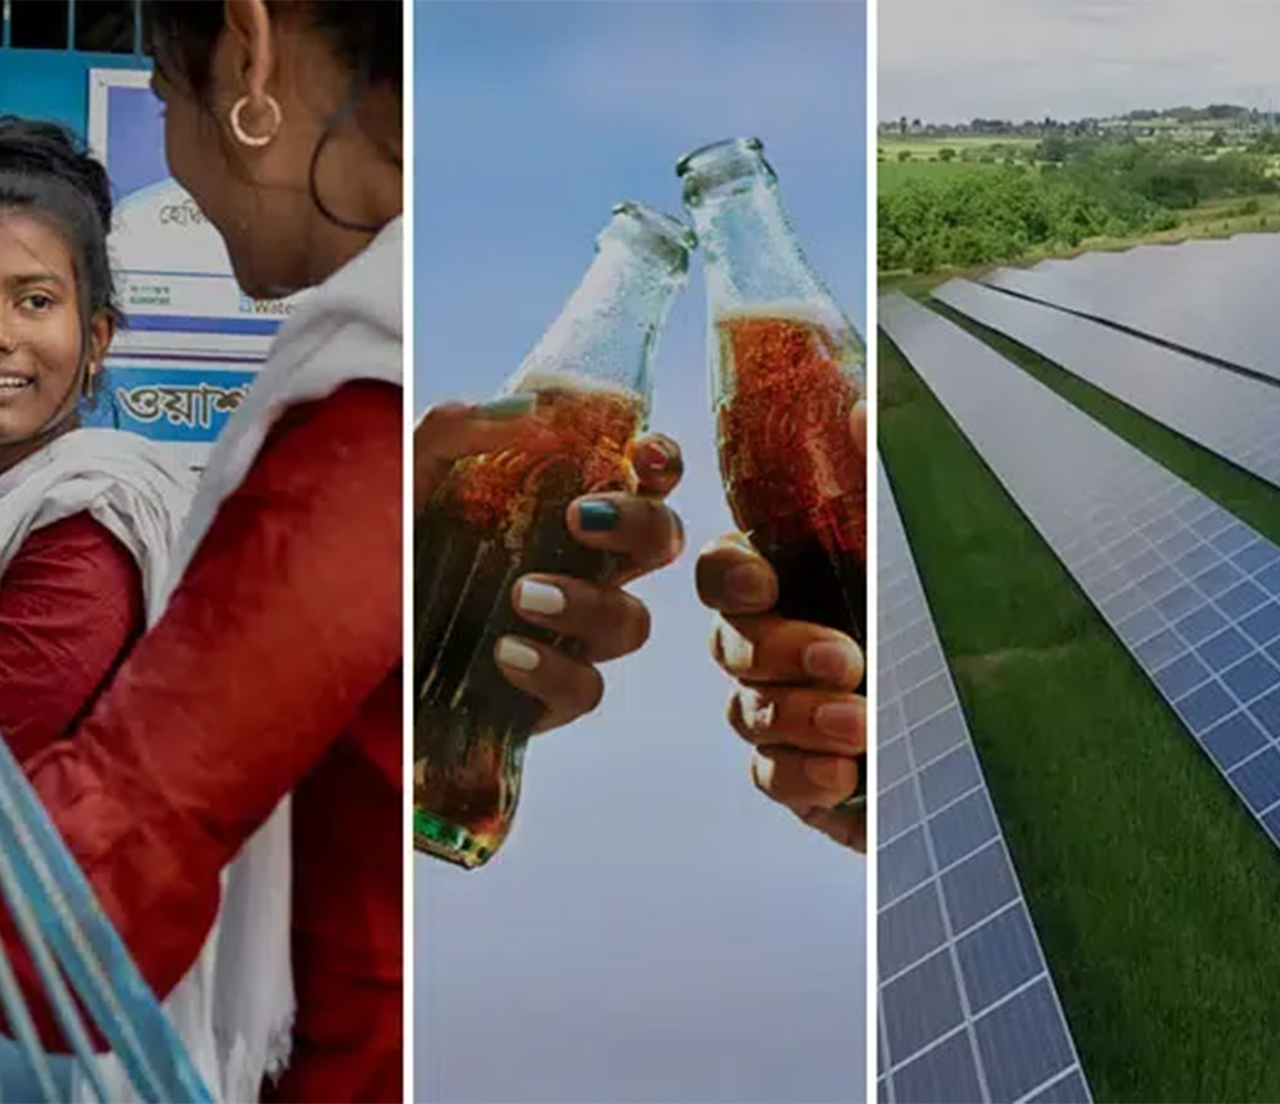 Three photos grouped side by side, with two women working together looking at each other, two bottles of Coca-Cola toasting, and solar panels in an open field